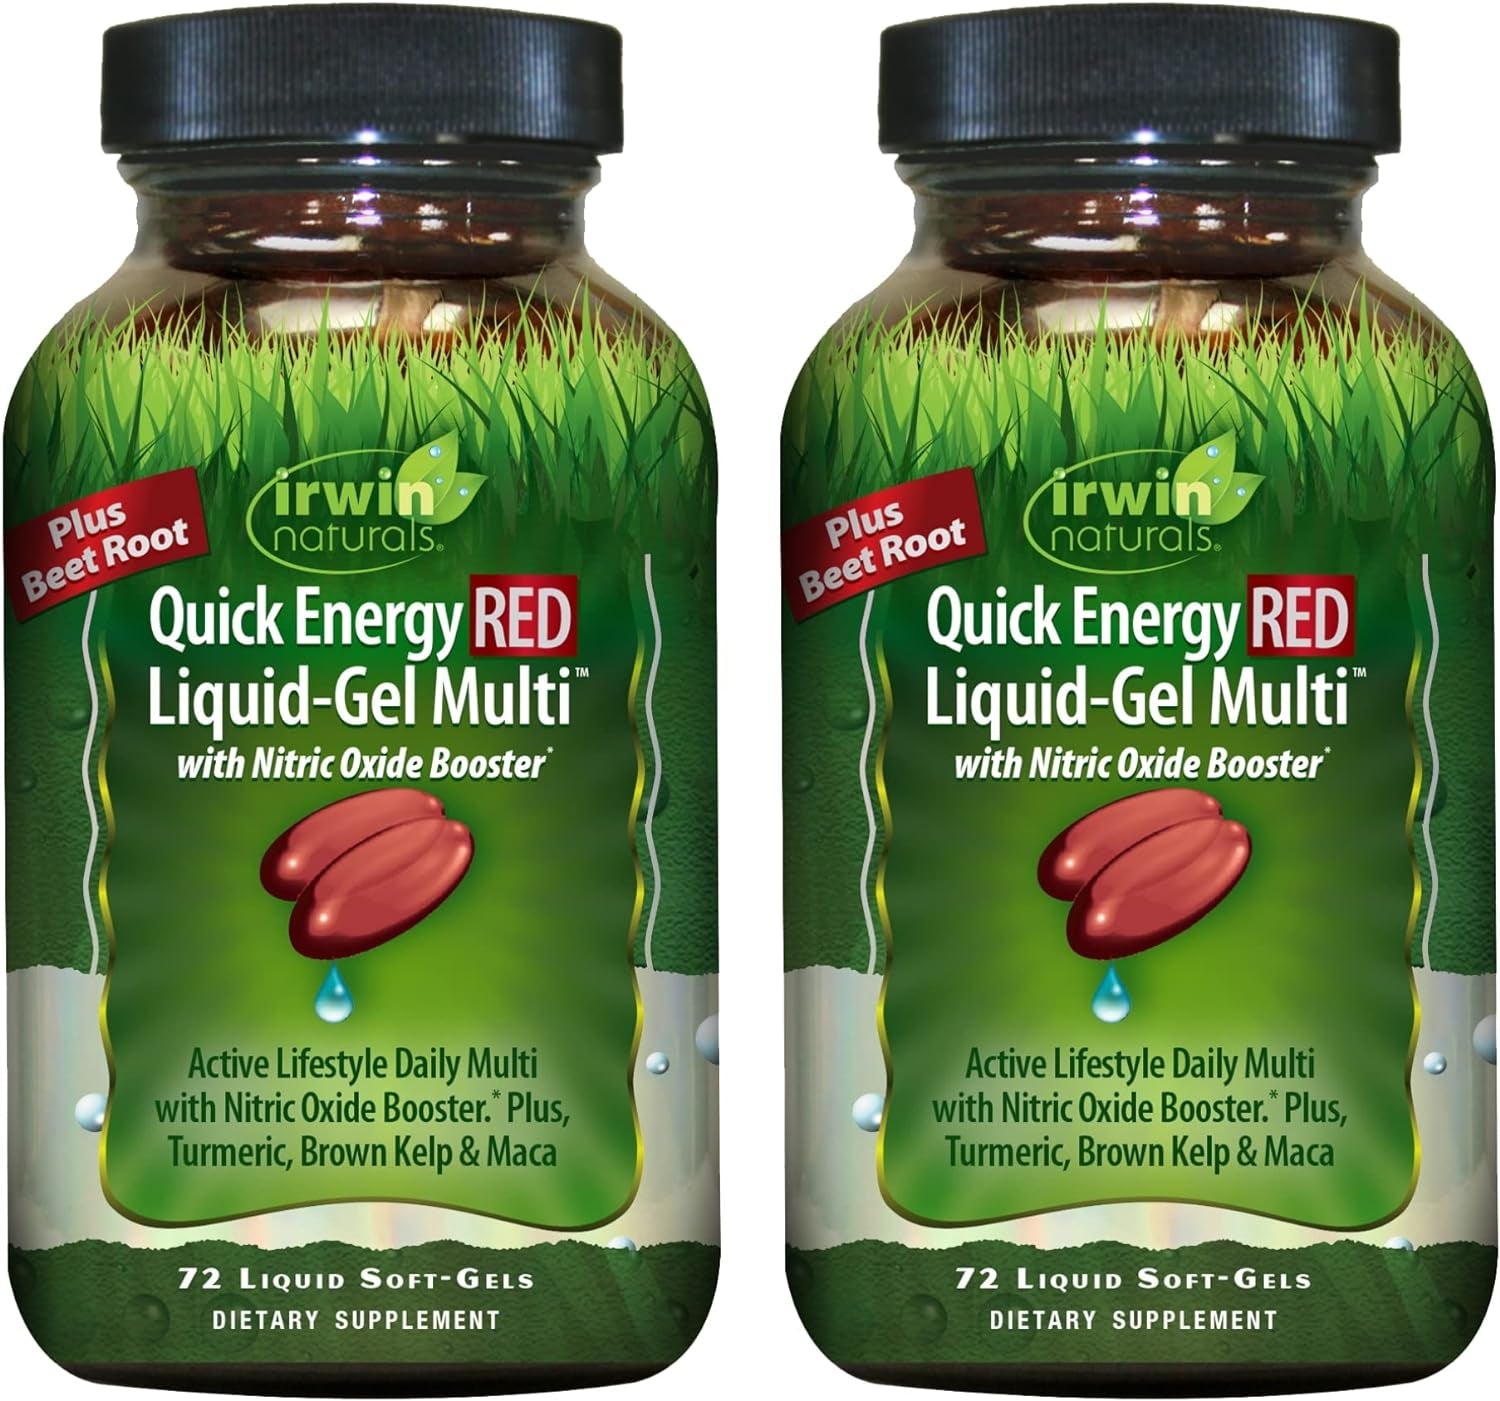 Irwin Naturals Quick Energy RED Liquid-Gel Multi - 72 Liquid Soft-Gels, Pack of 2 - with Nitric Oxide Booster & Super Foods - 72 Total Servings